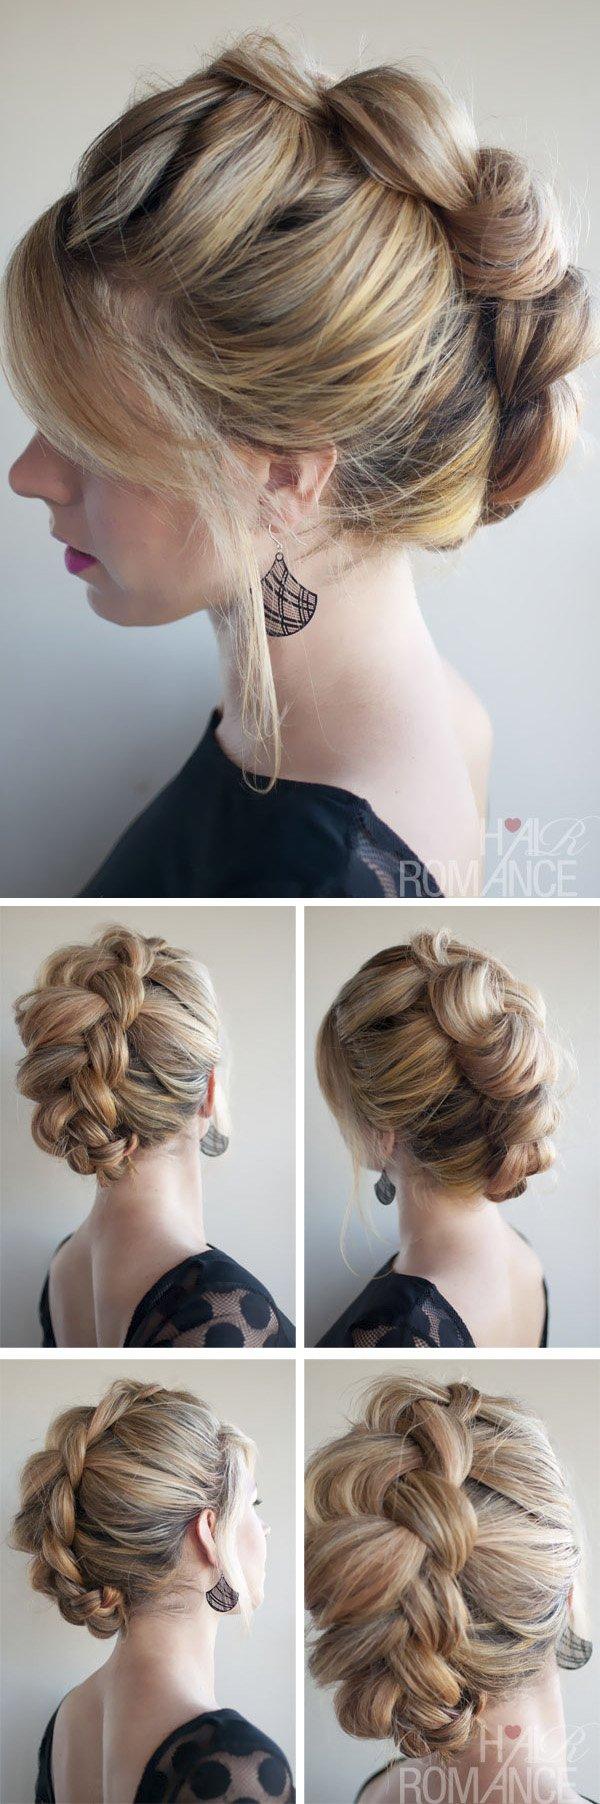 9 Easy And Chic Hairstyle Tutorials With Braids